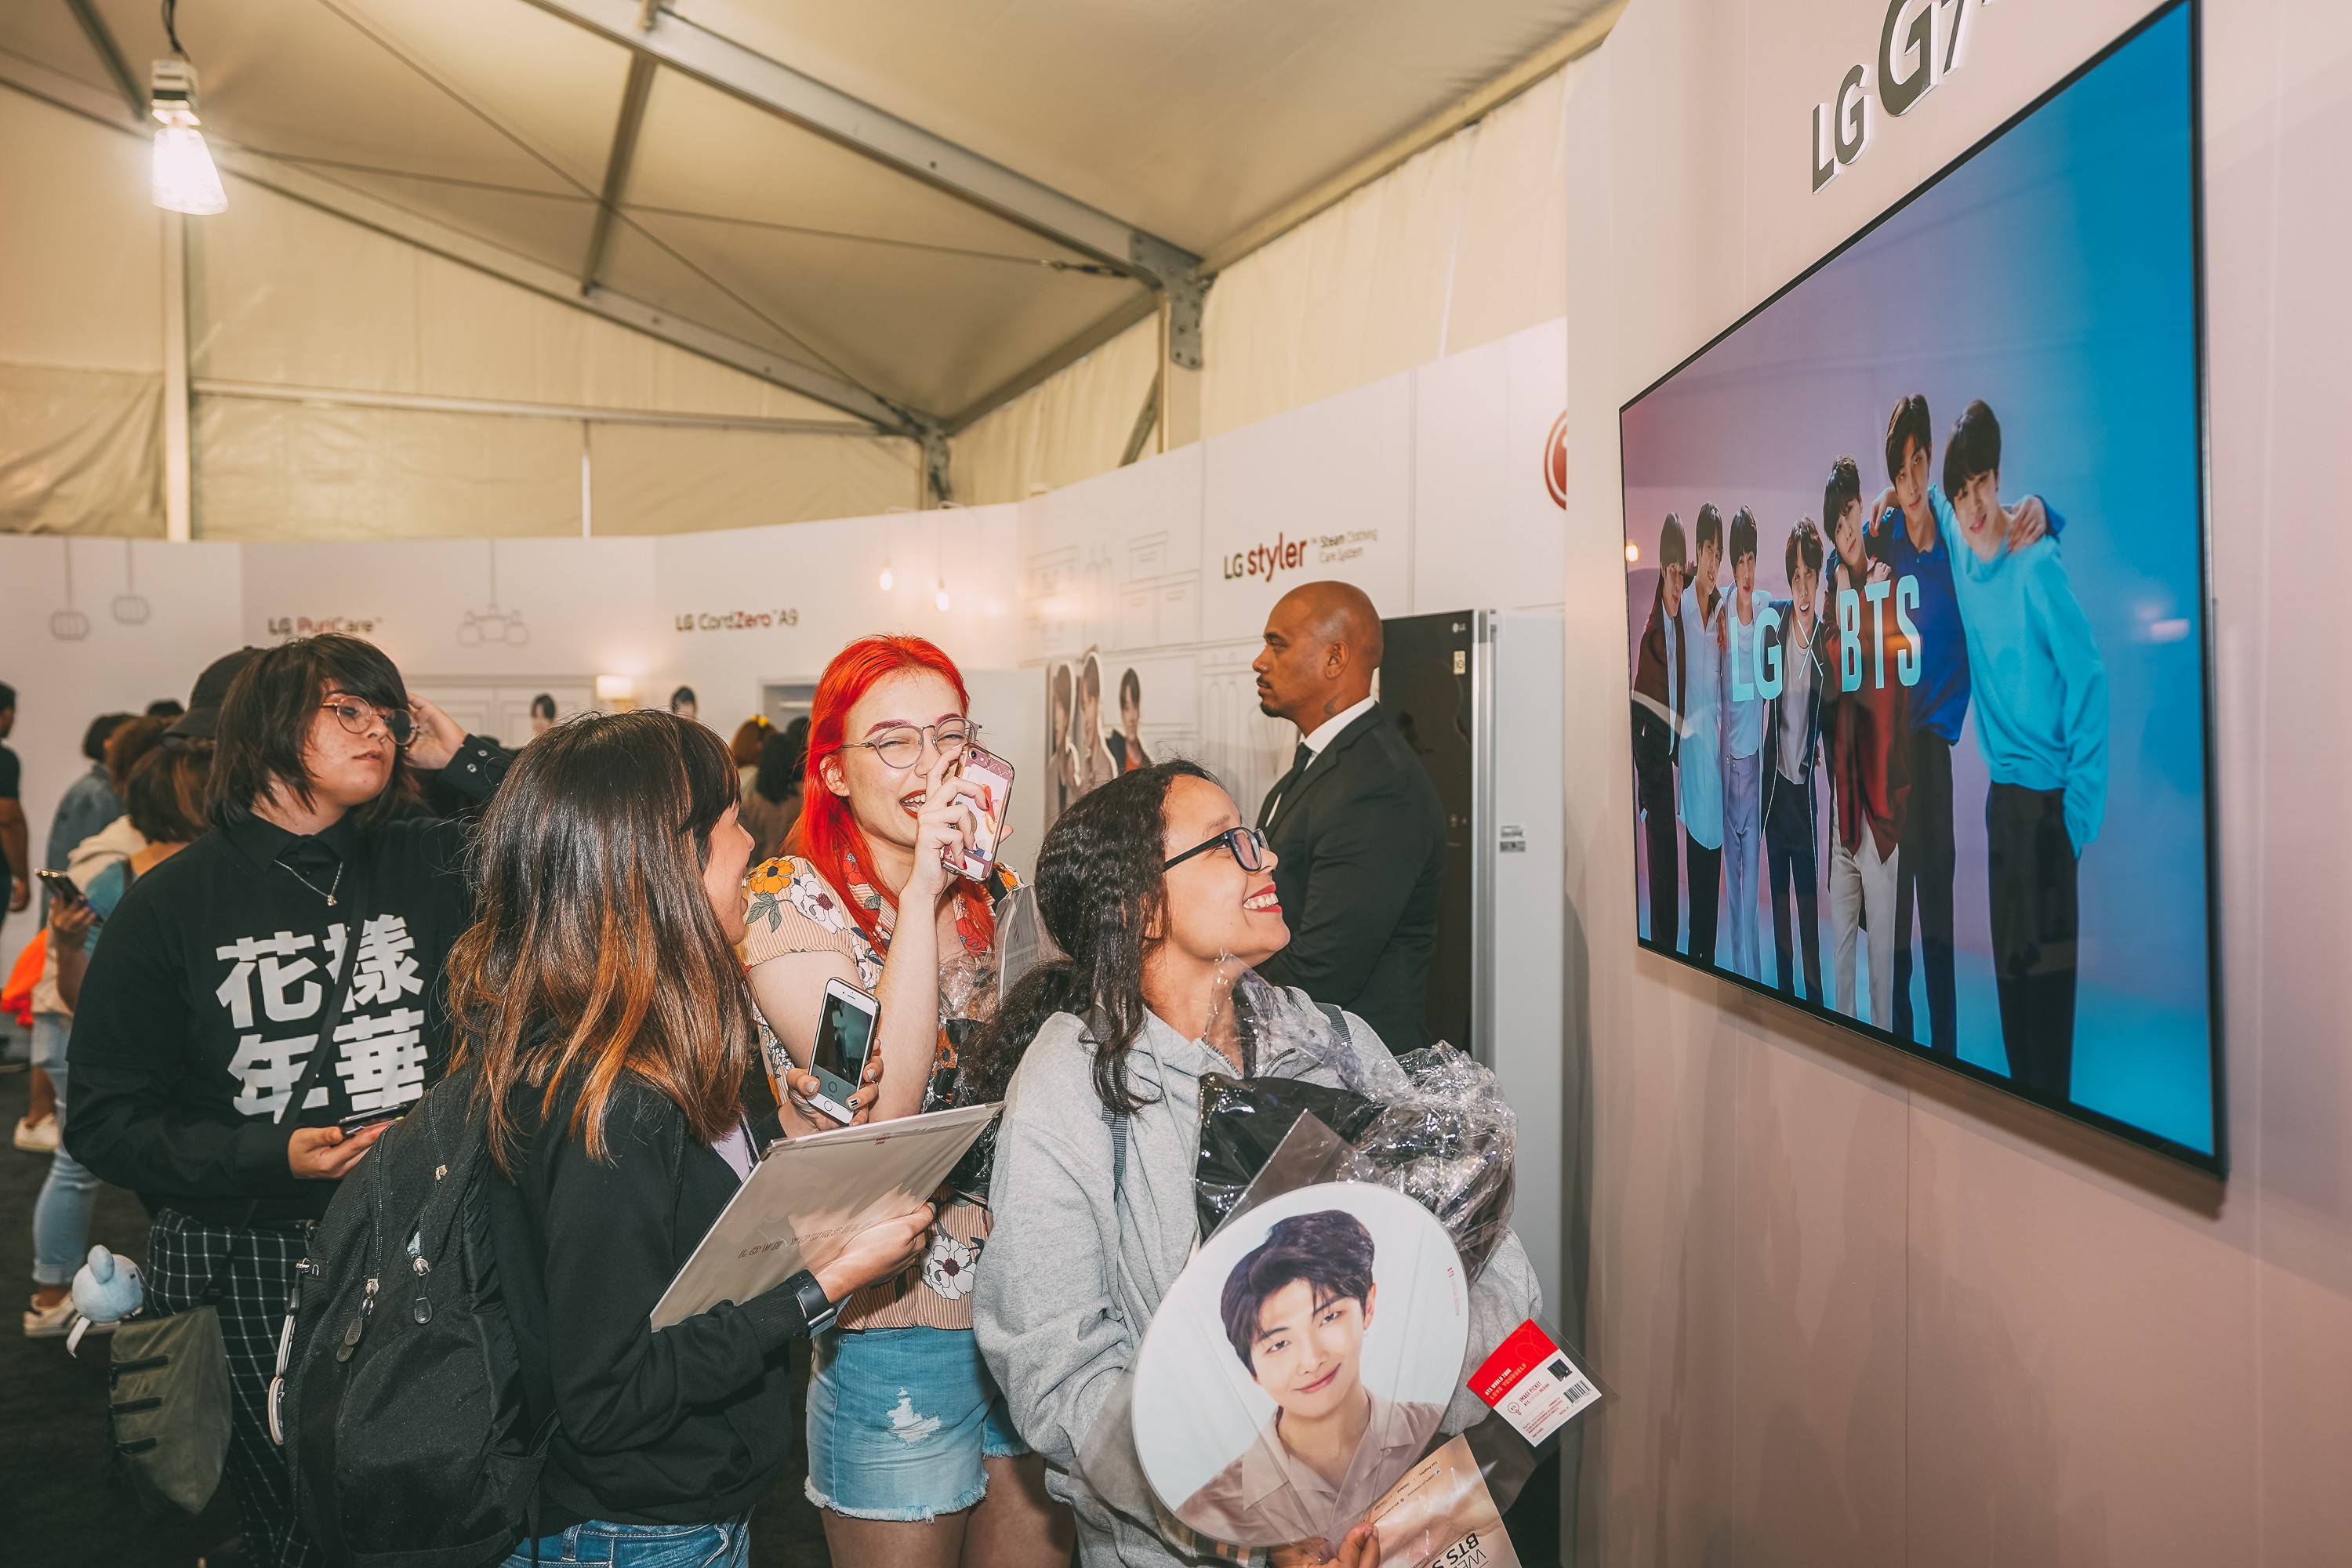 BTS fans enjoy a BTS video at the BTS Studio Presented by LG.